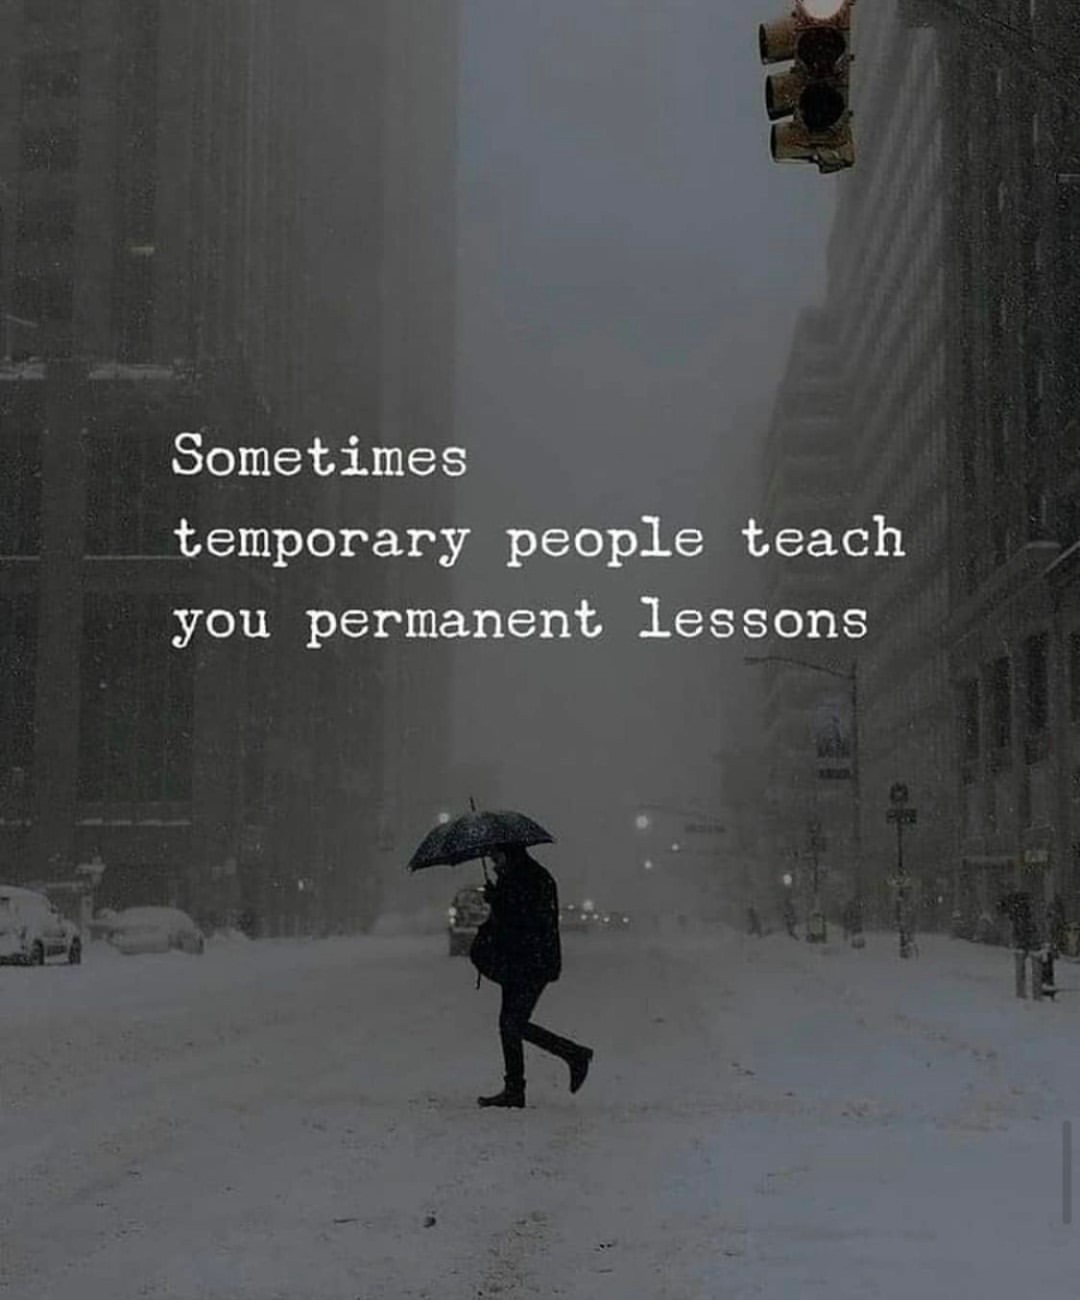 Sometimes temporary people teach you permanent lessons.